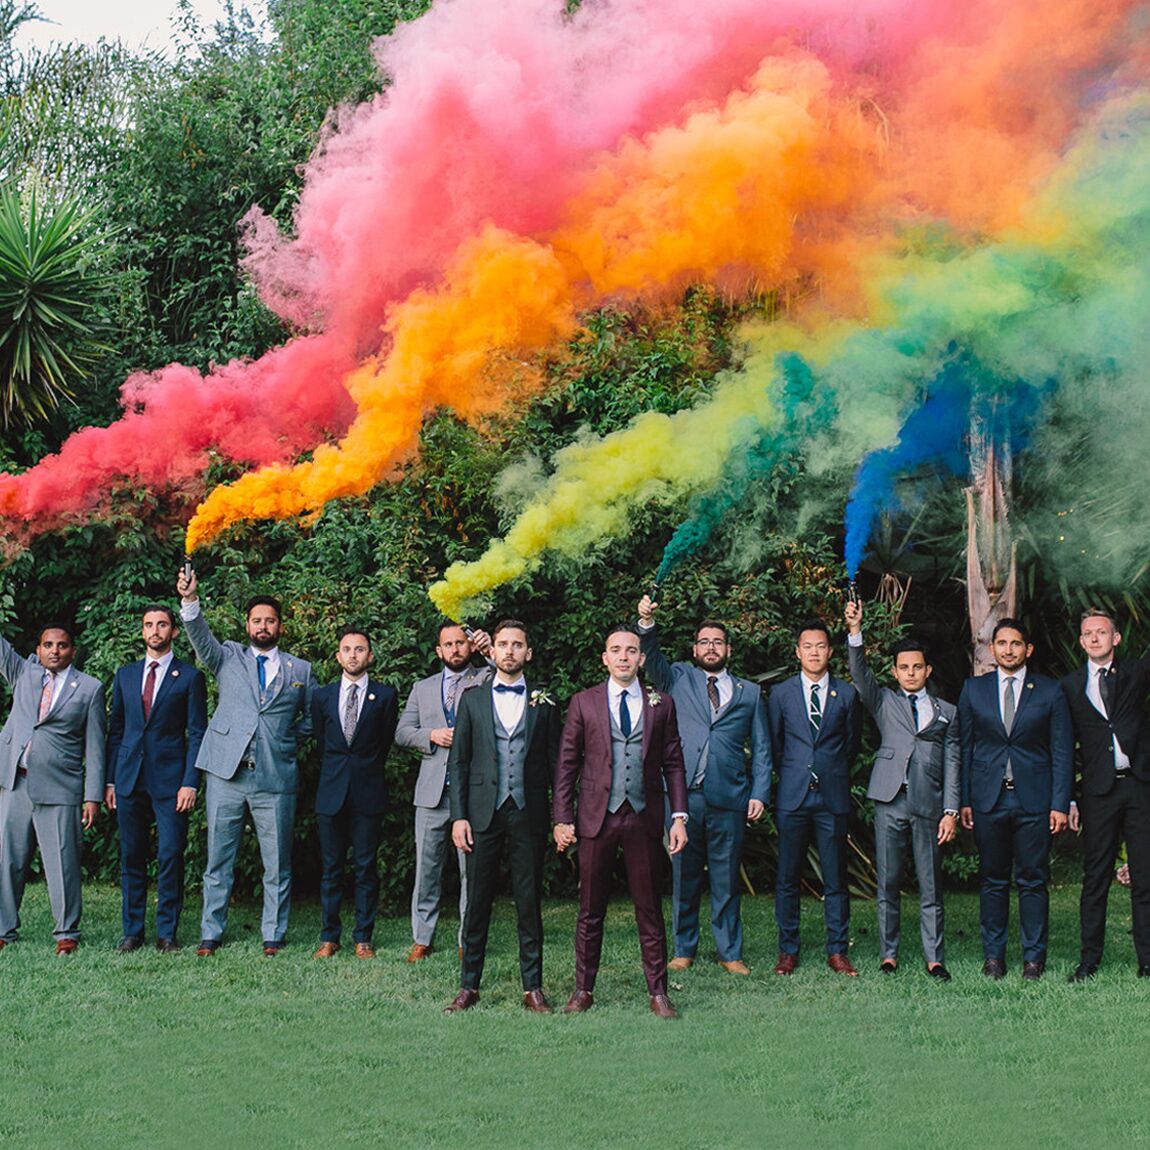 rainbow galore done with remind that this is a gay couple getting married   very symbolic